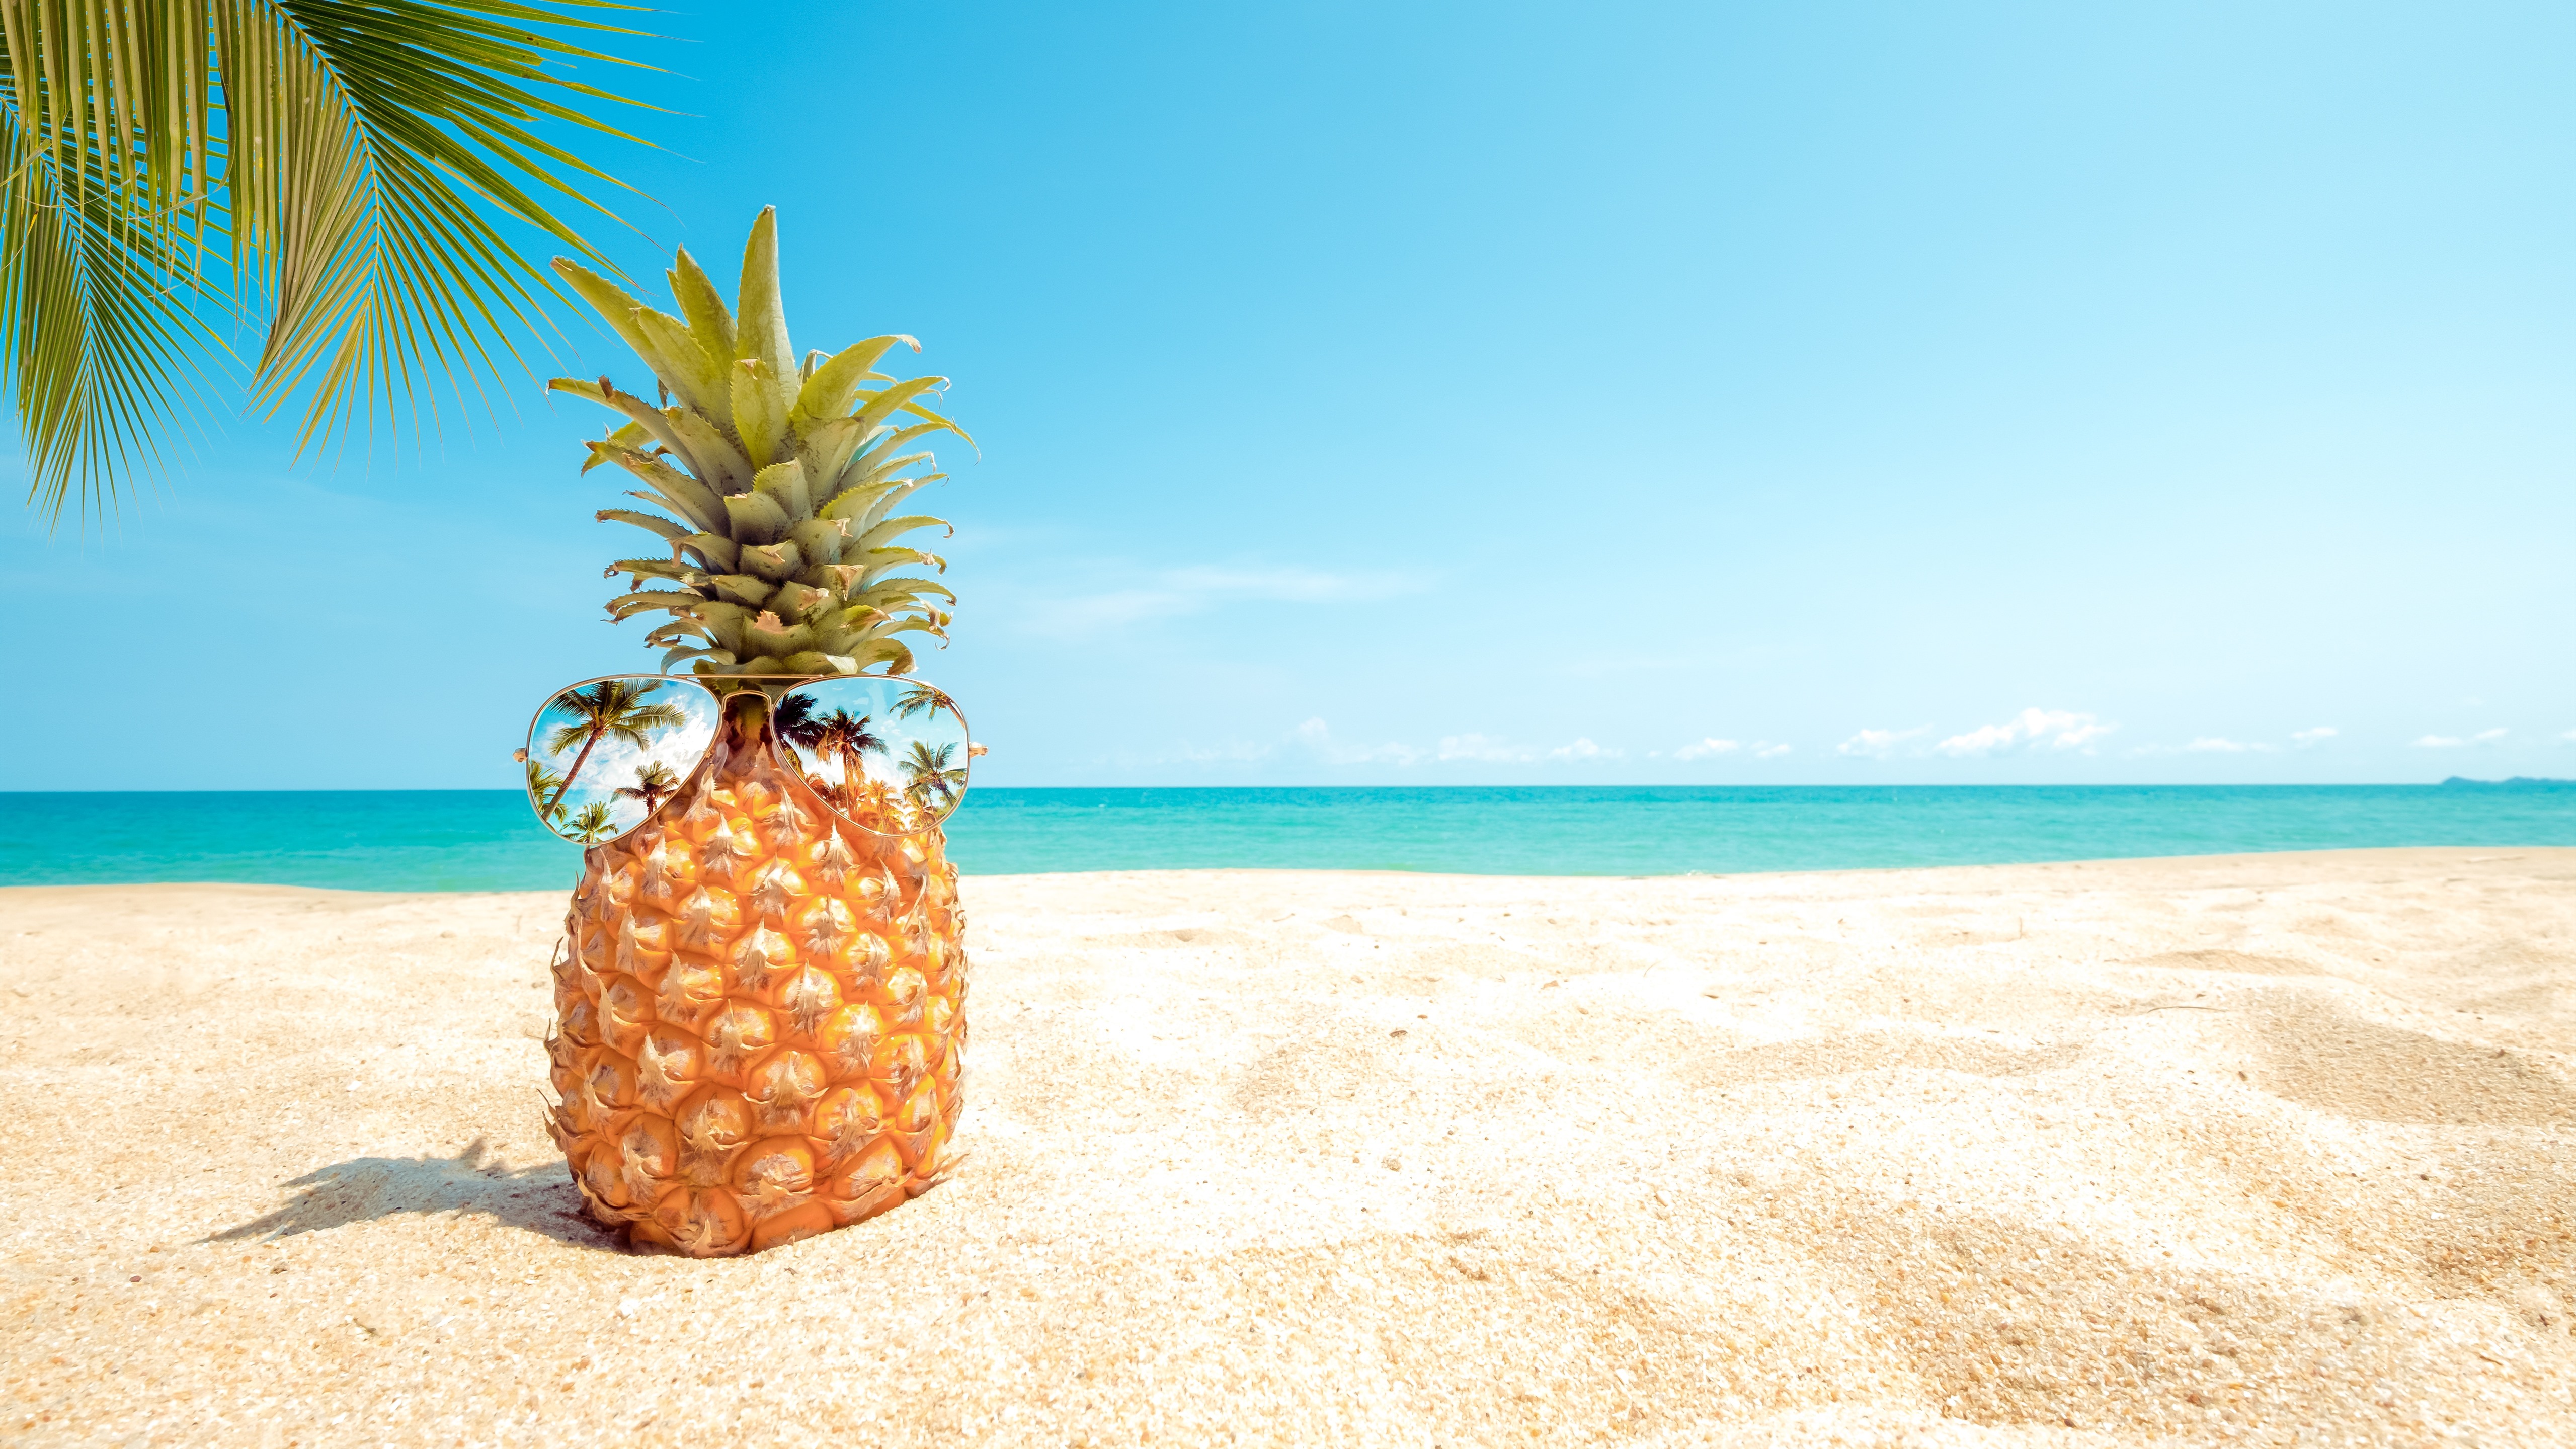 Download This Wallpaper - Pineapple On A Beach , HD Wallpaper & Backgrounds